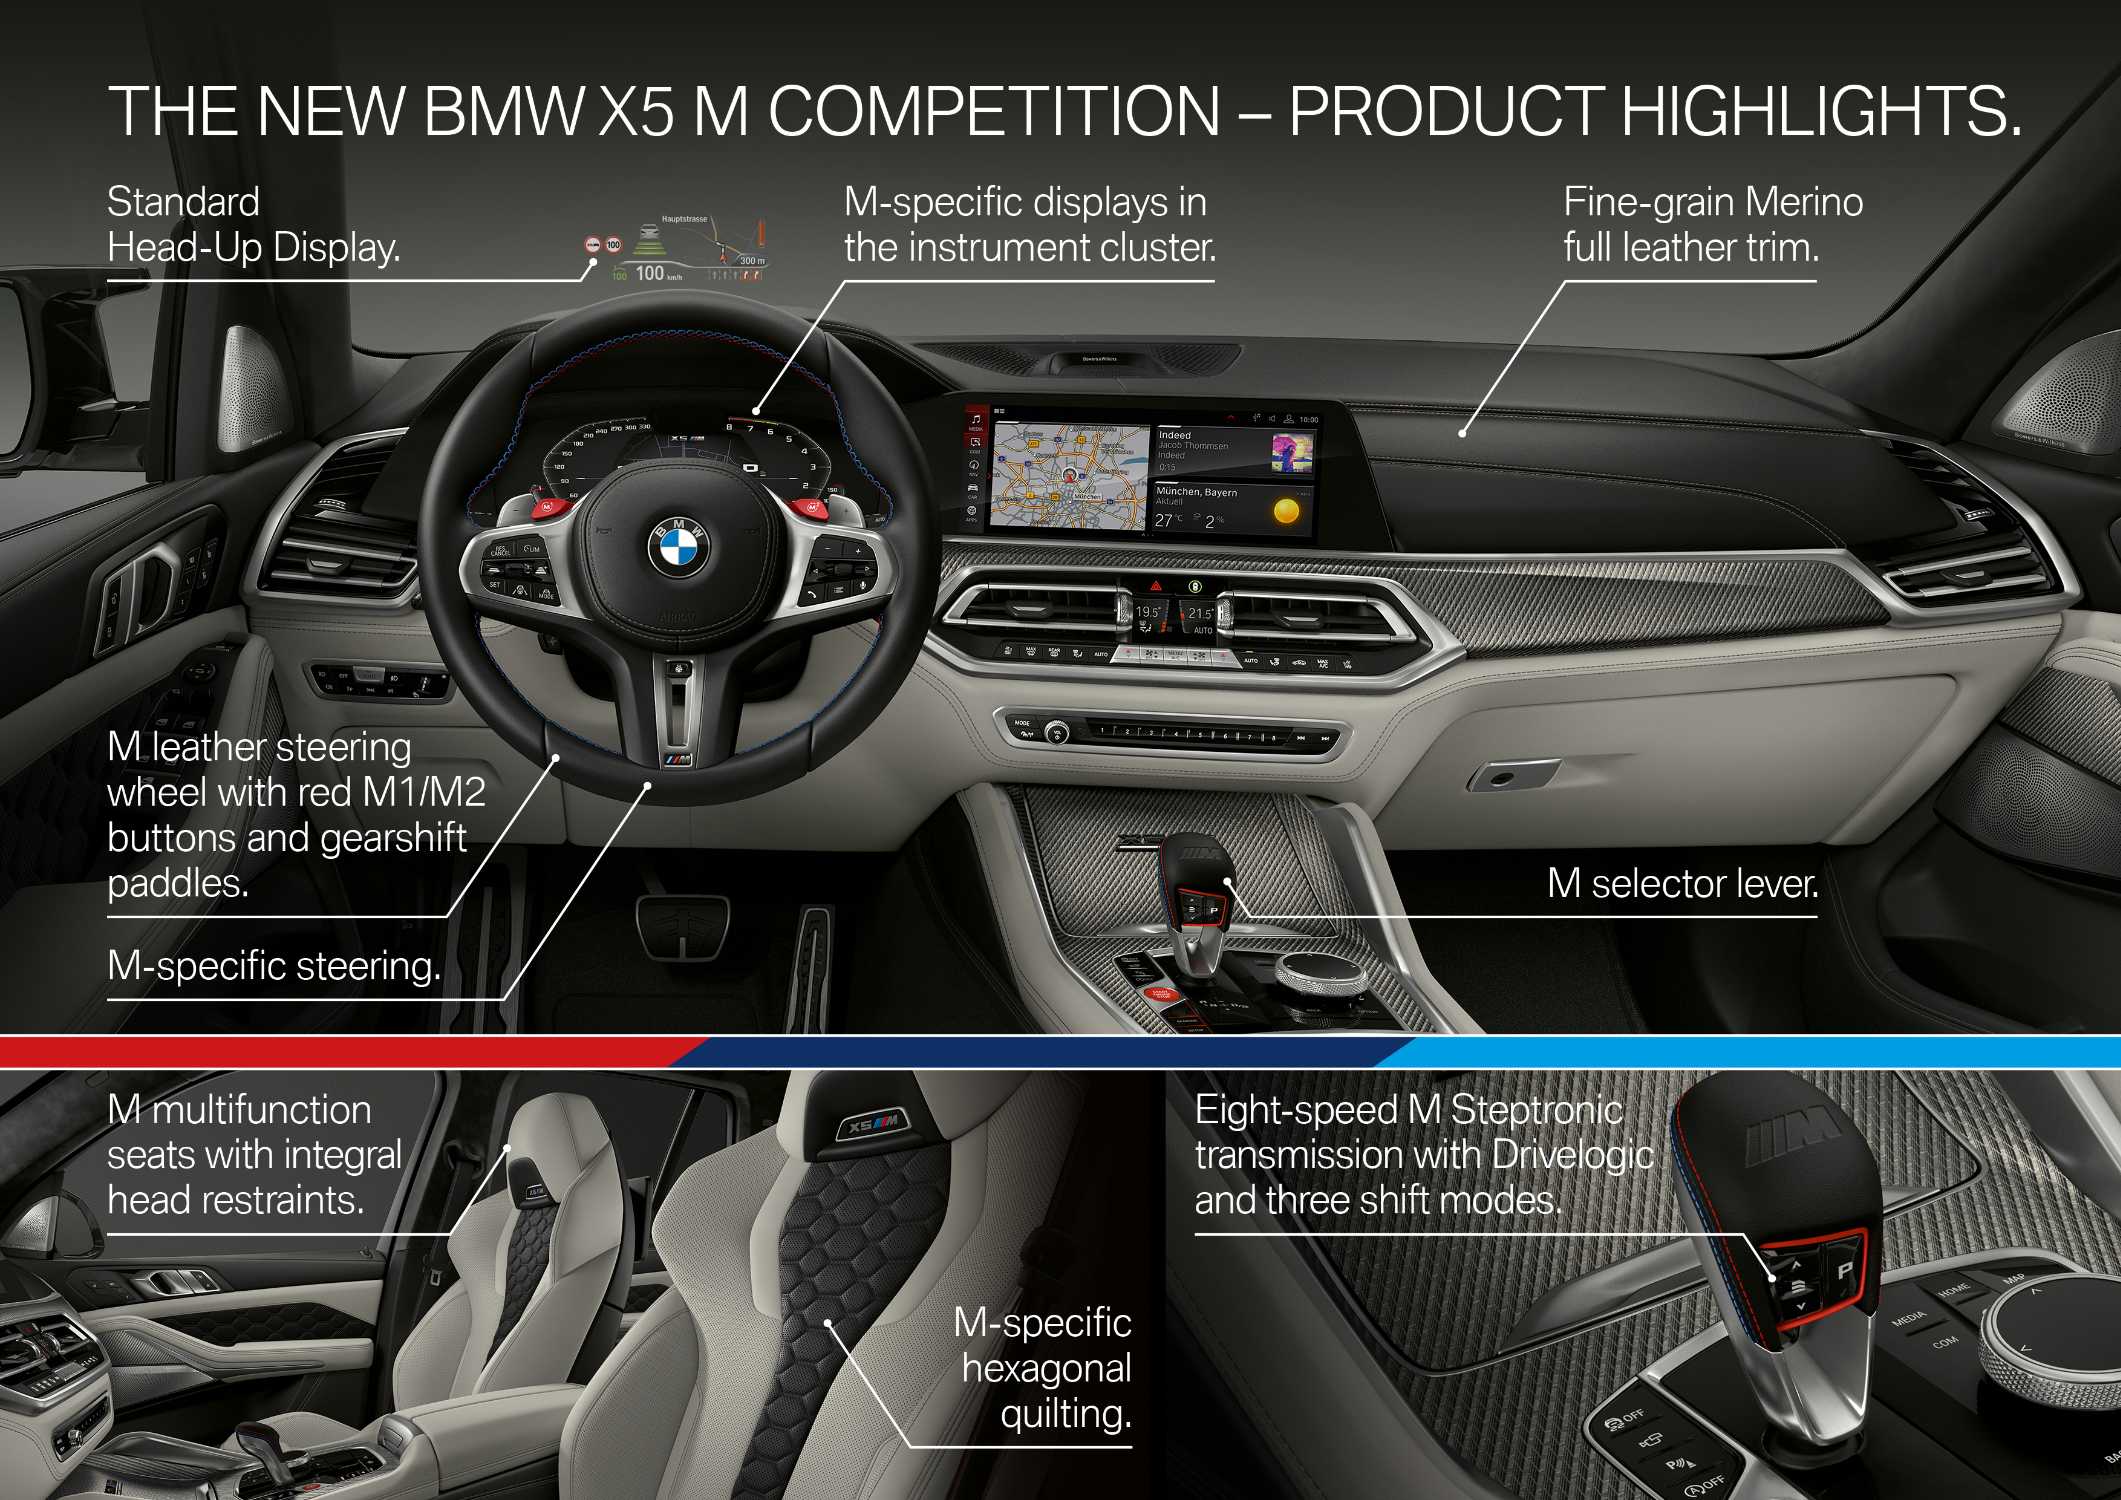 The new BMW X5 M and BMW X5 M Competition. (10/2019)